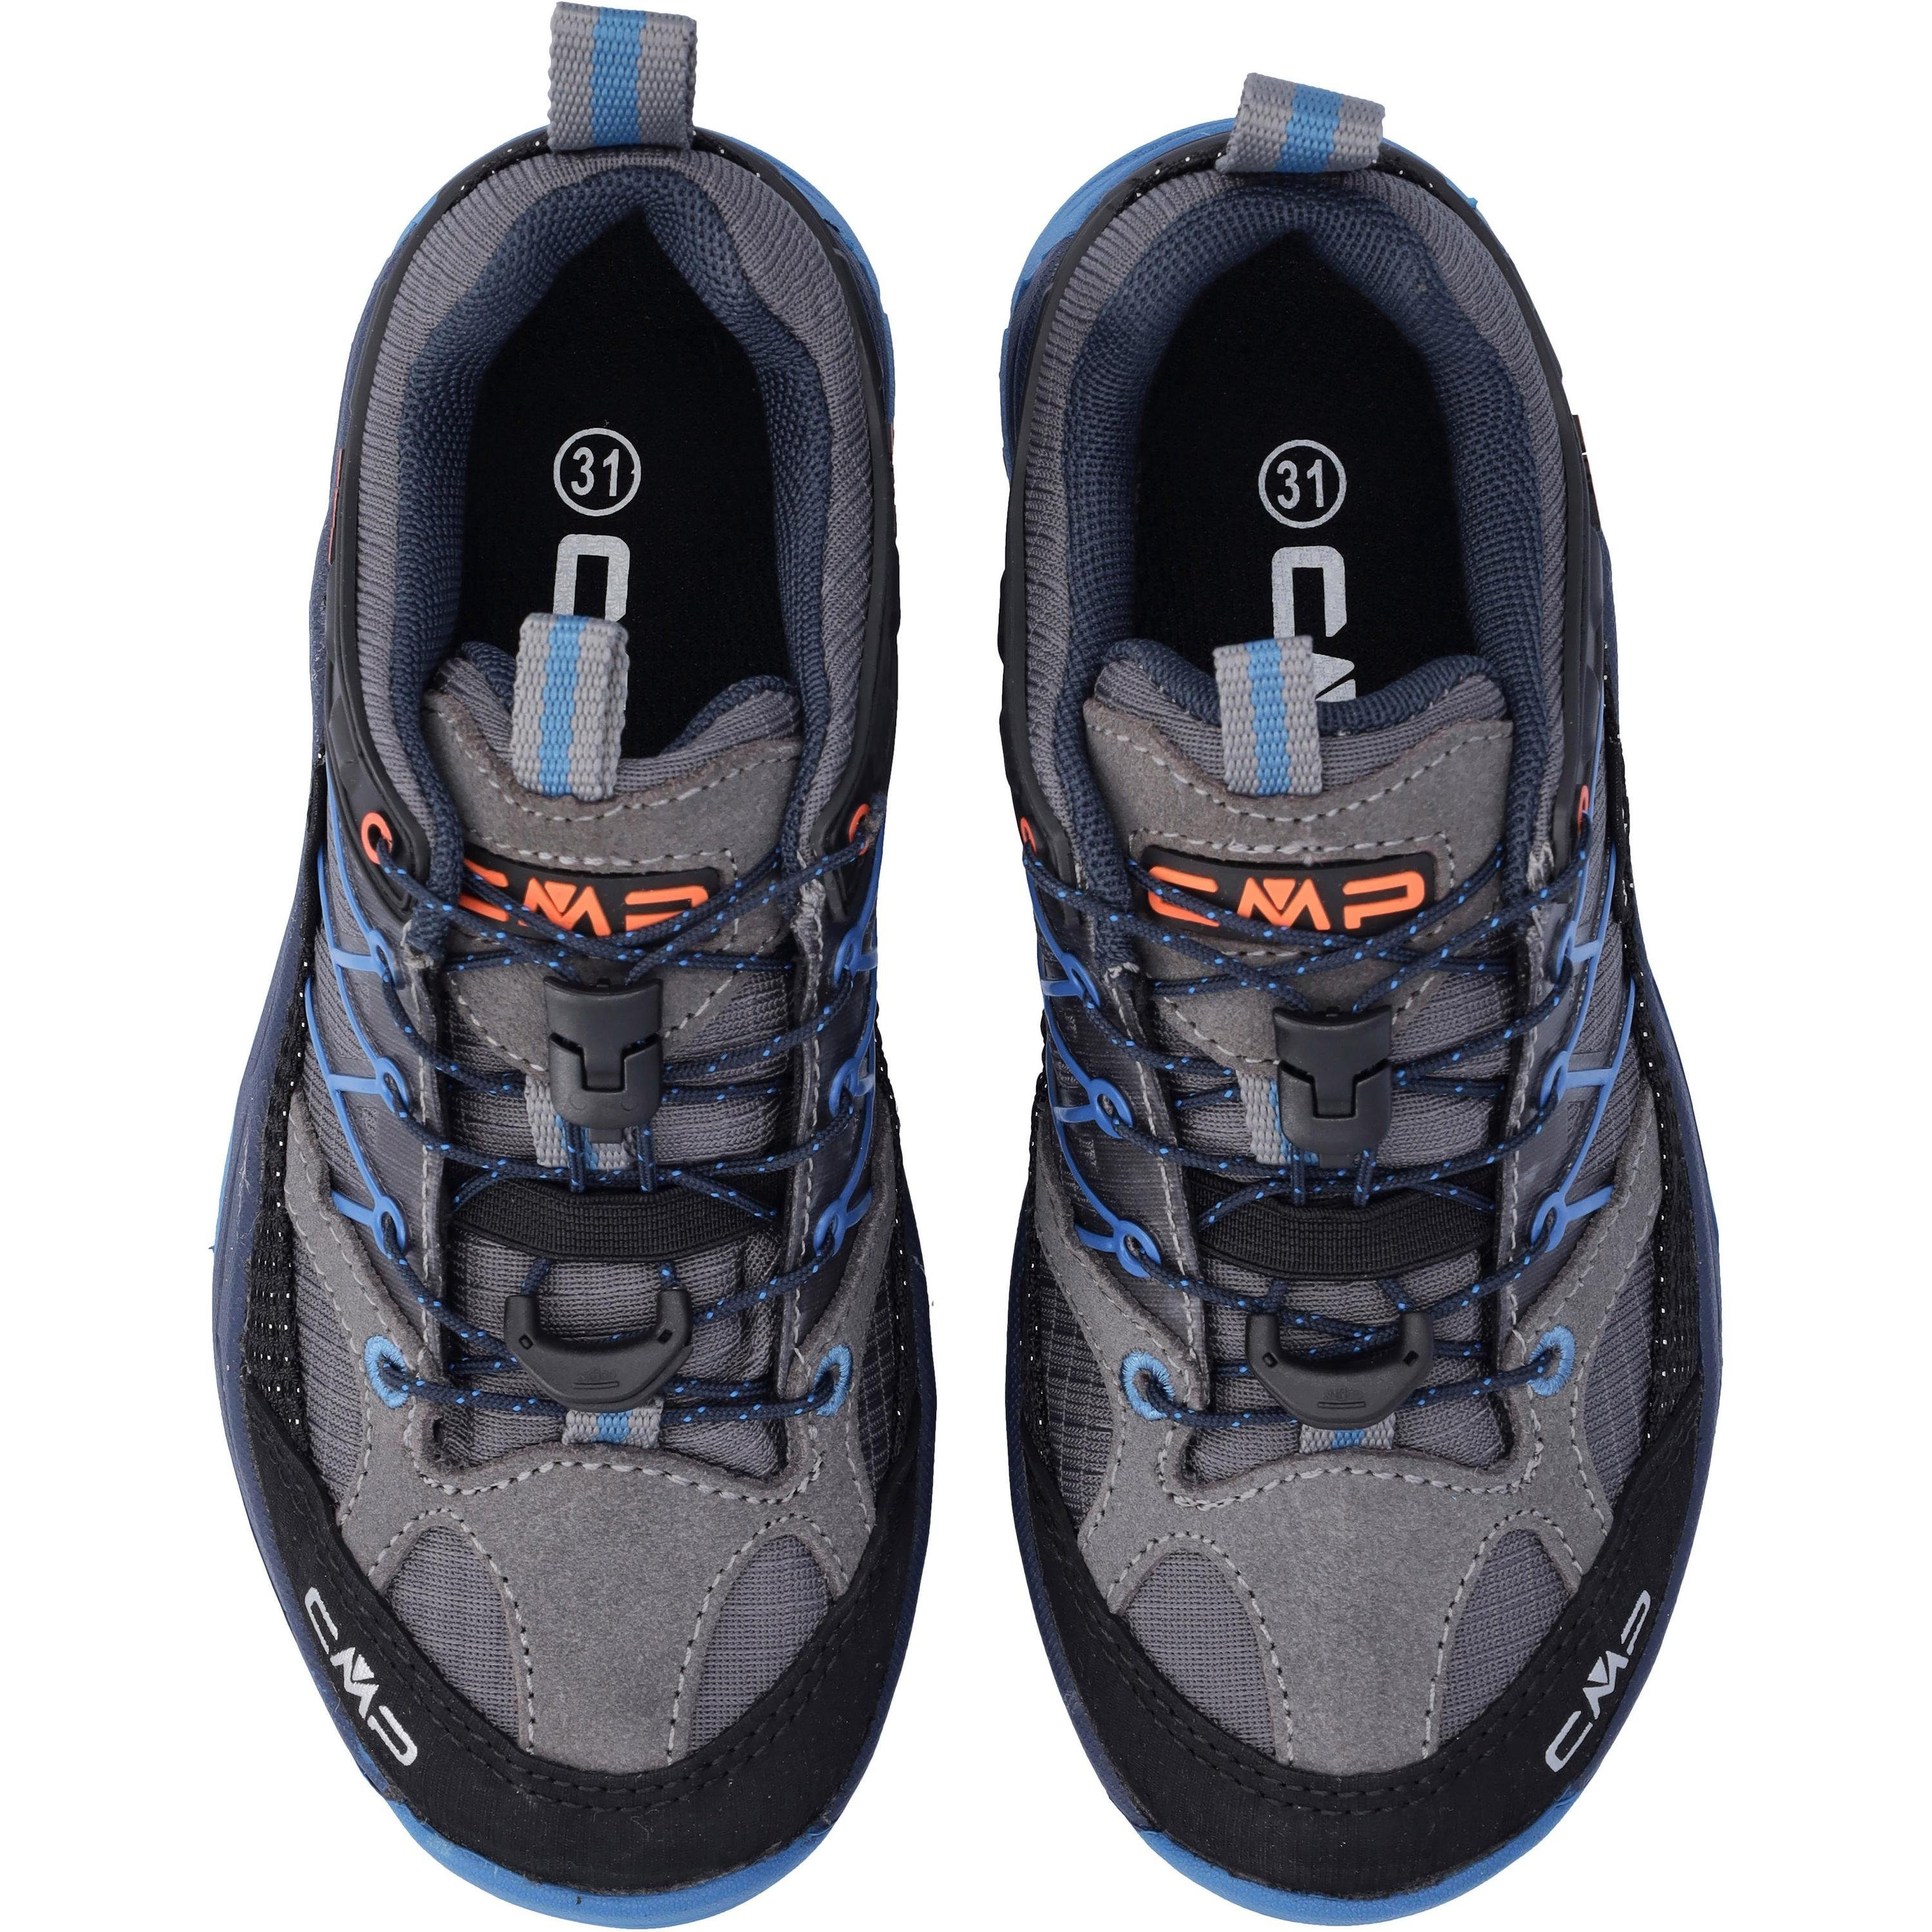 CMP Rigel Low WP graffite-oltremare Outdoorschuh